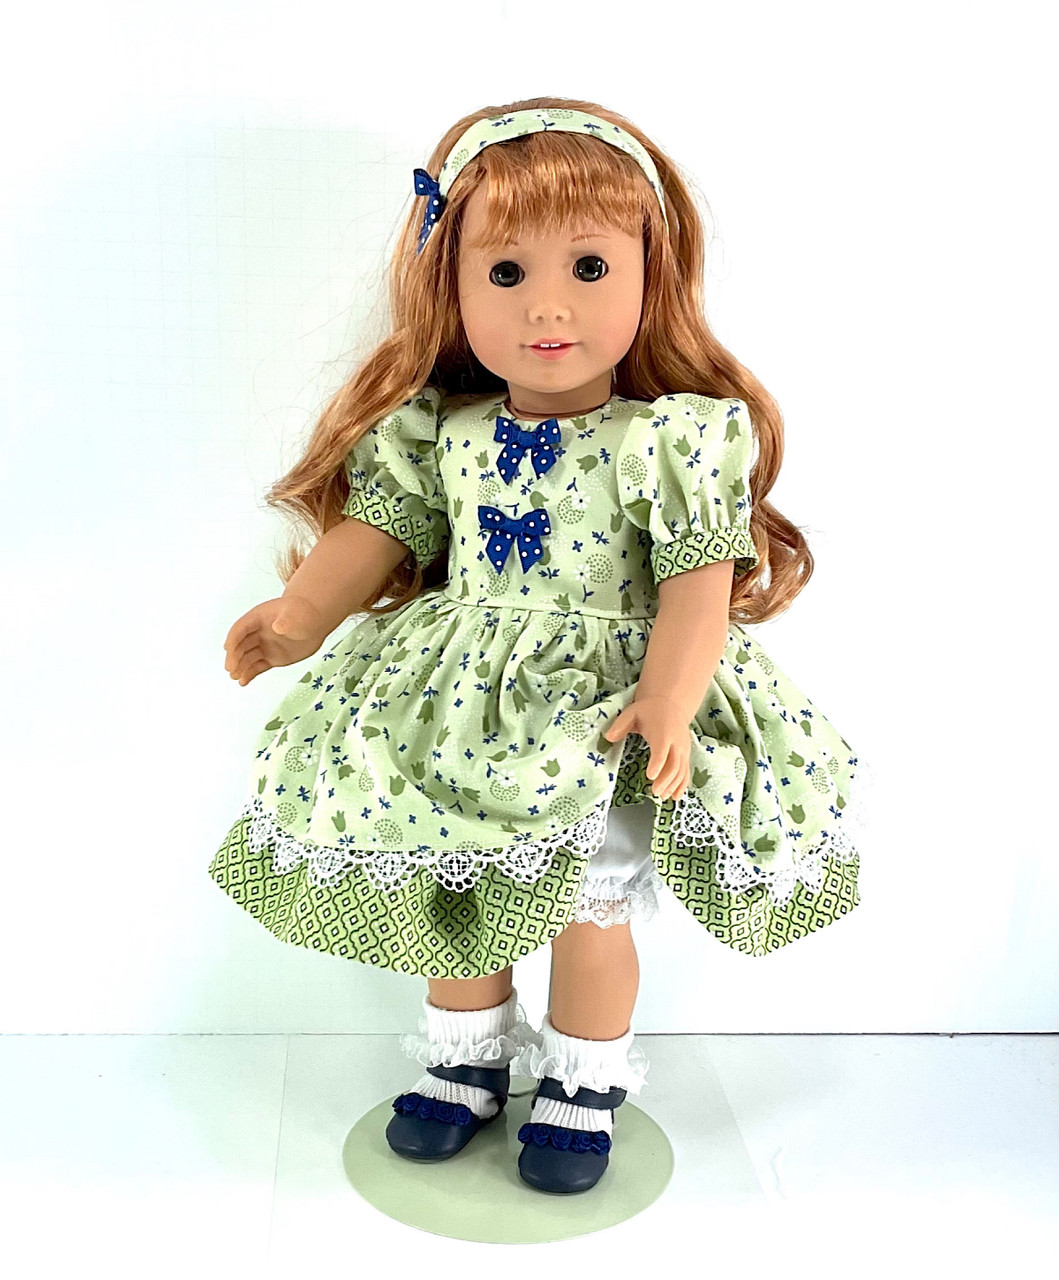 Handmade 18 Inch Doll Clothes fit American Girl - Dress, Headband, Bloomers  - Green, Blue Floral